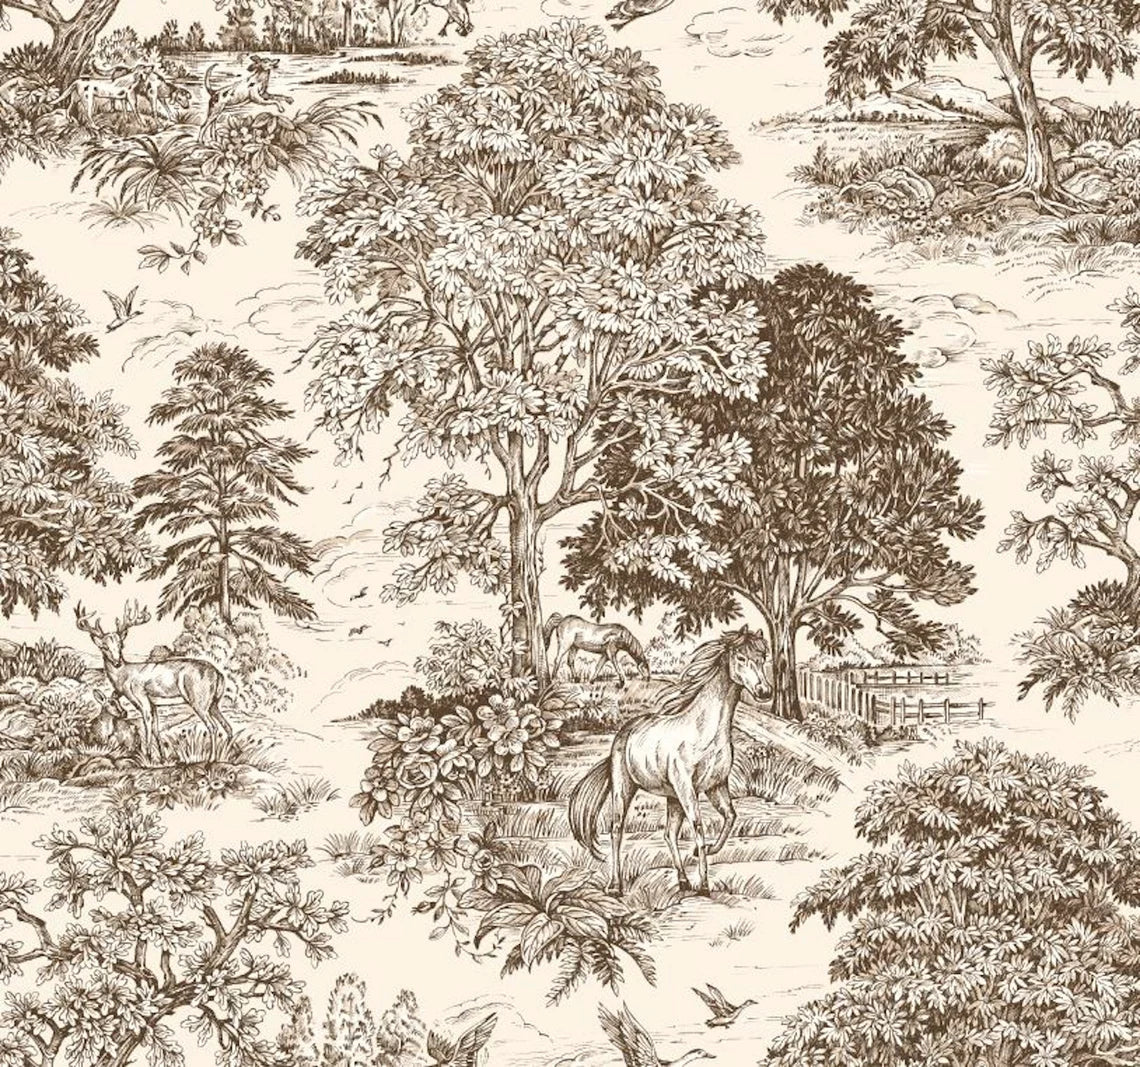 tailored valance in Yellowstone Driftwood Brown Country Toile- Horses, Deer, Dogs- Large Scale